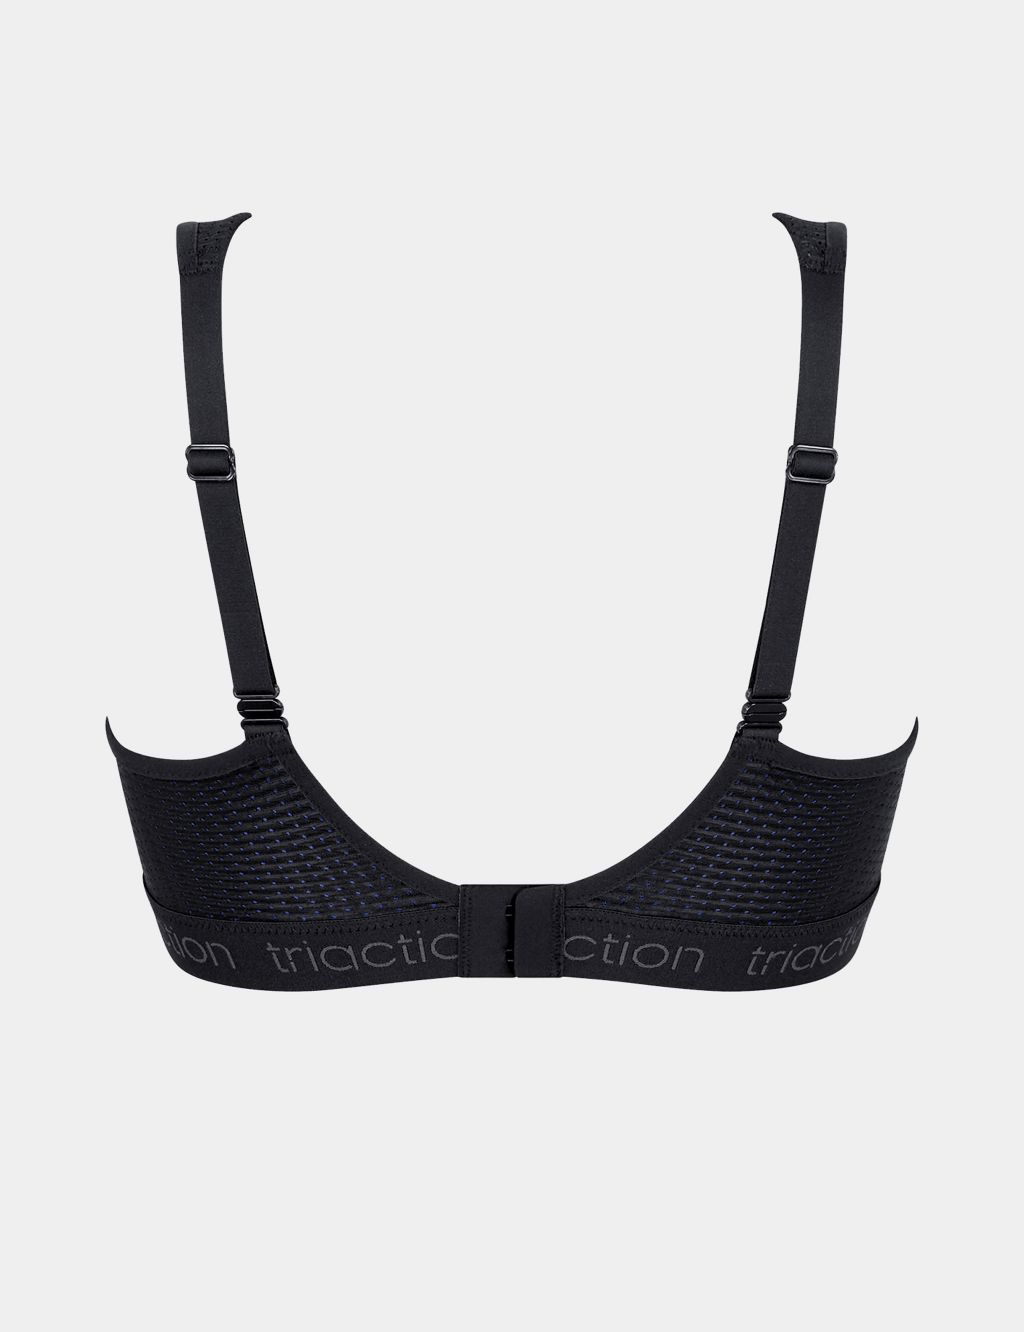 Triaction Energy Lite Non Wired Sports Bra image 6